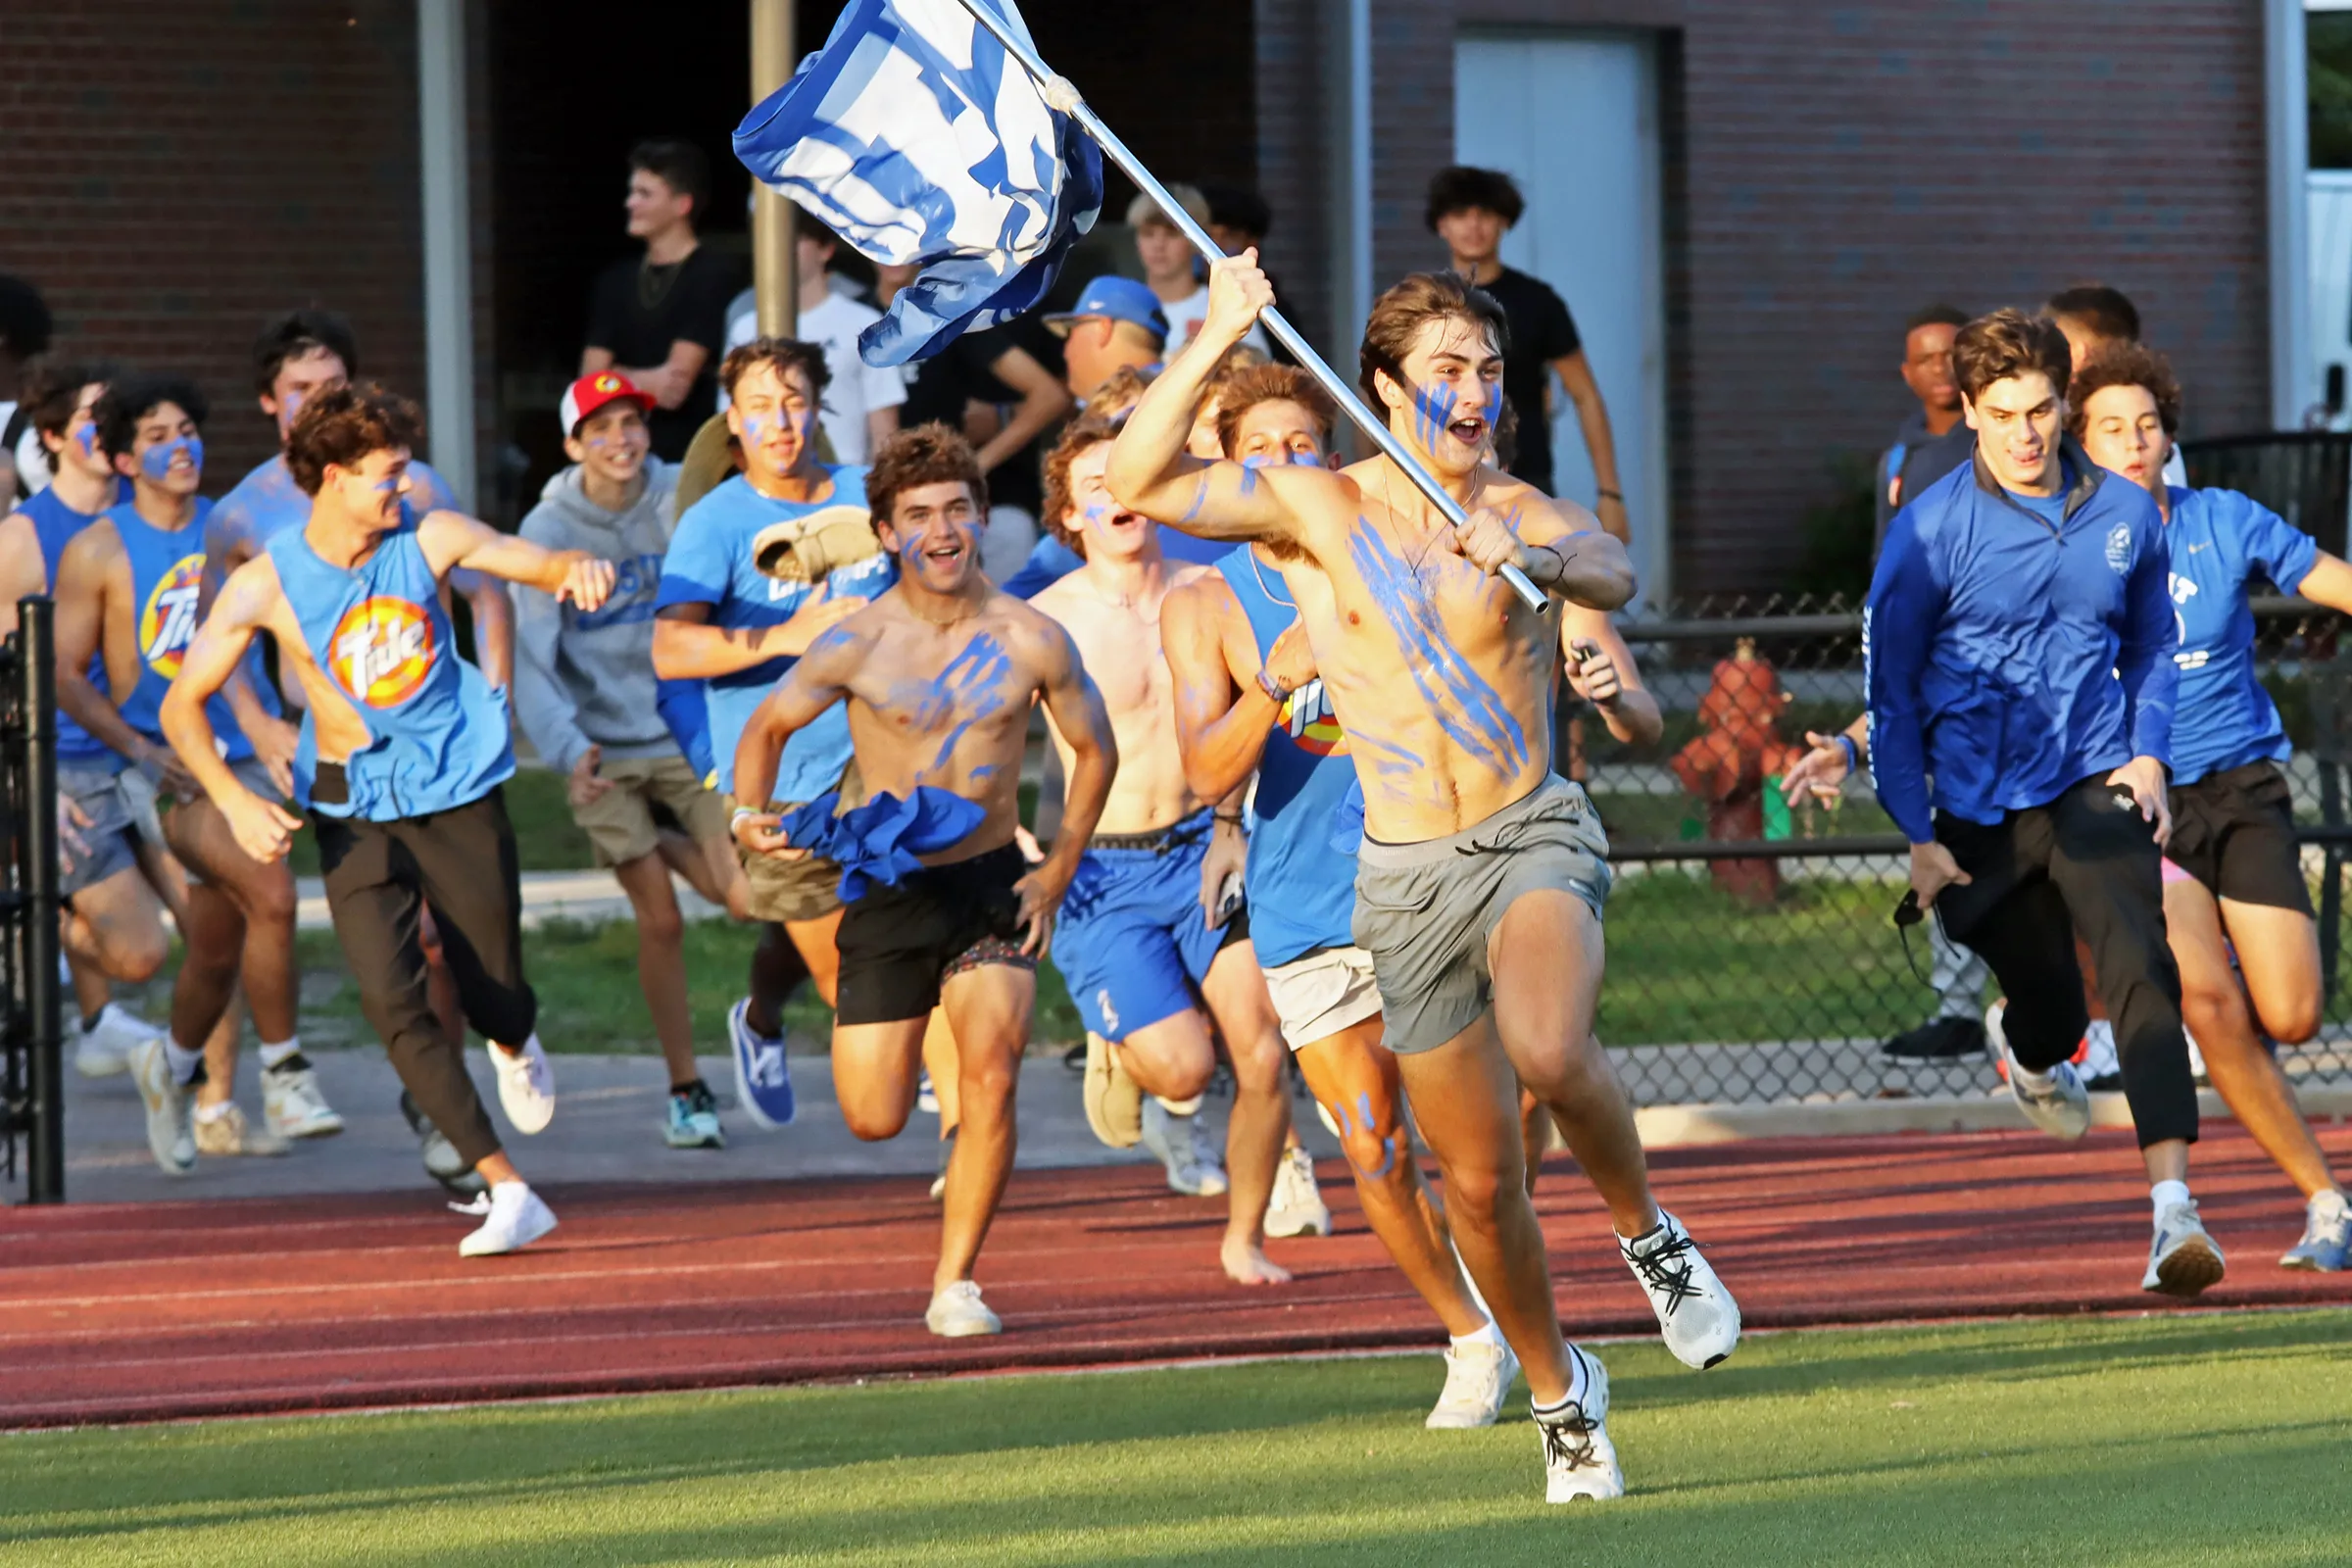 Jesuit High School student fans run out to the bleachers ahead of a football game. Credit: Jesuit High School